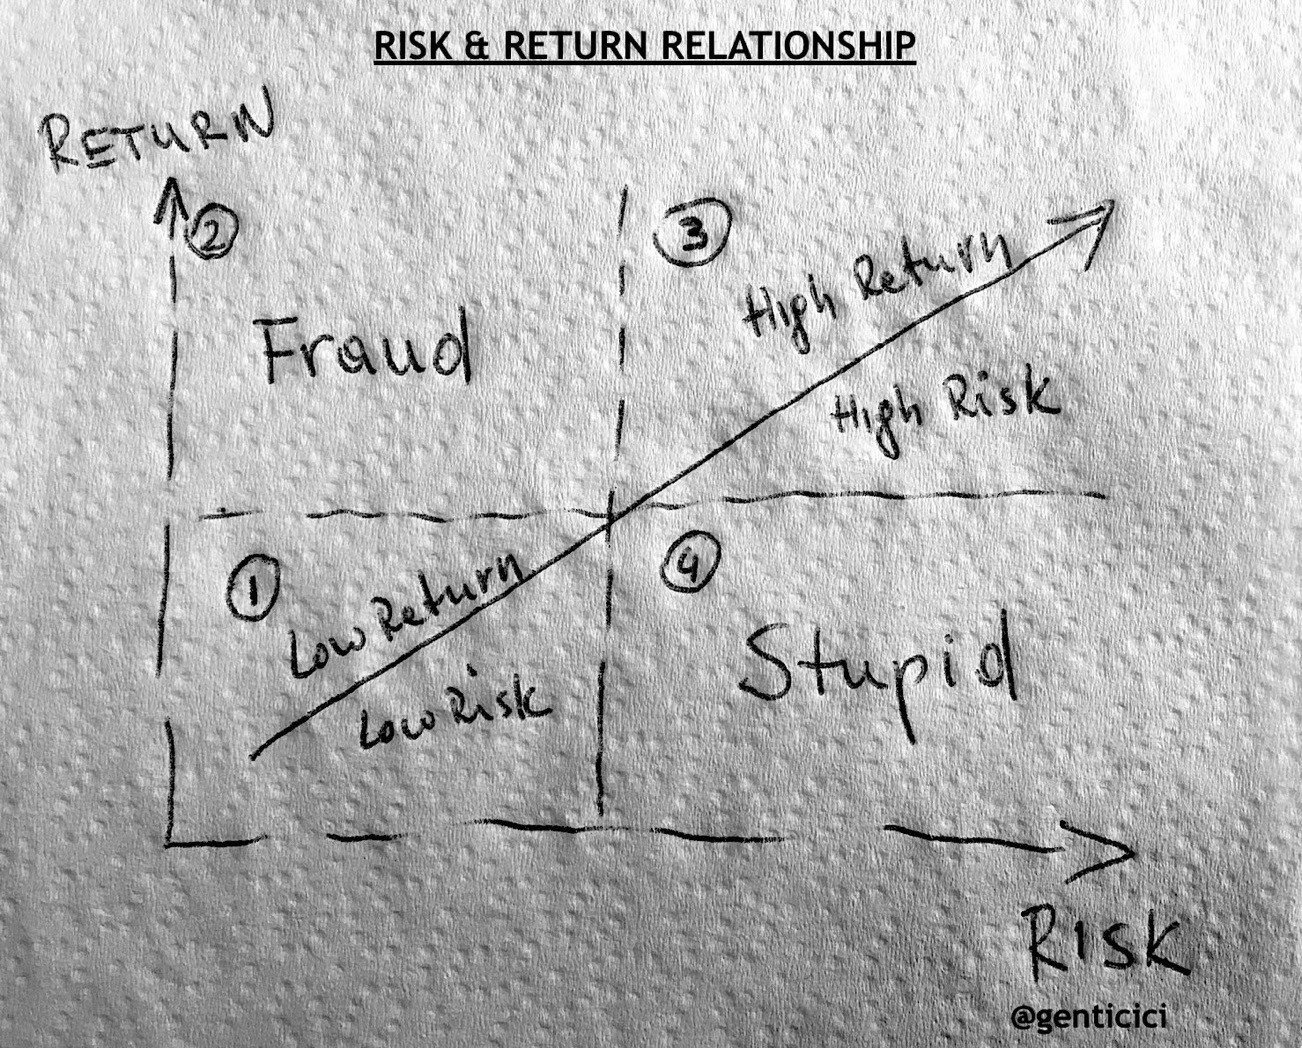 chart breaks down the risk and return relationship into four quadrants: low return and low risk, high return and high risk, fraud, and stupid